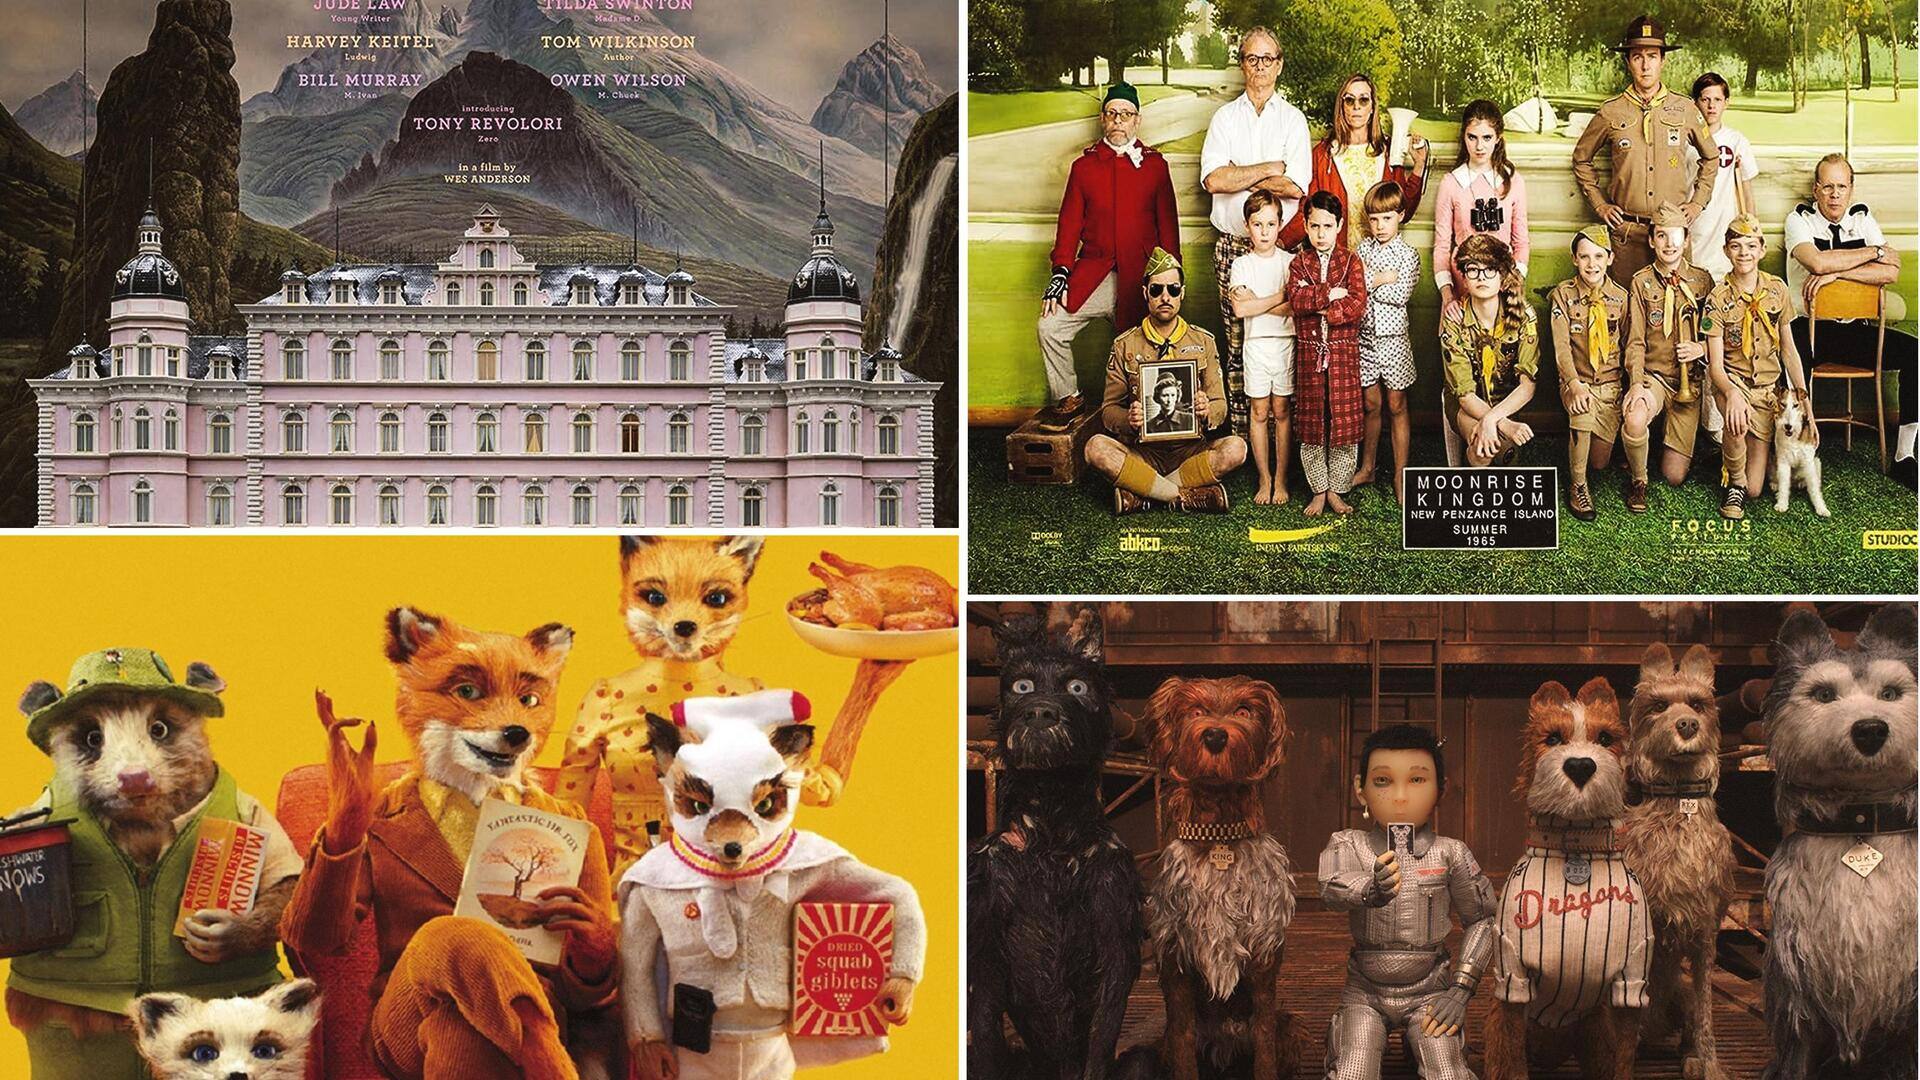 Top 5 Wes Anderson movies, according to IMDb